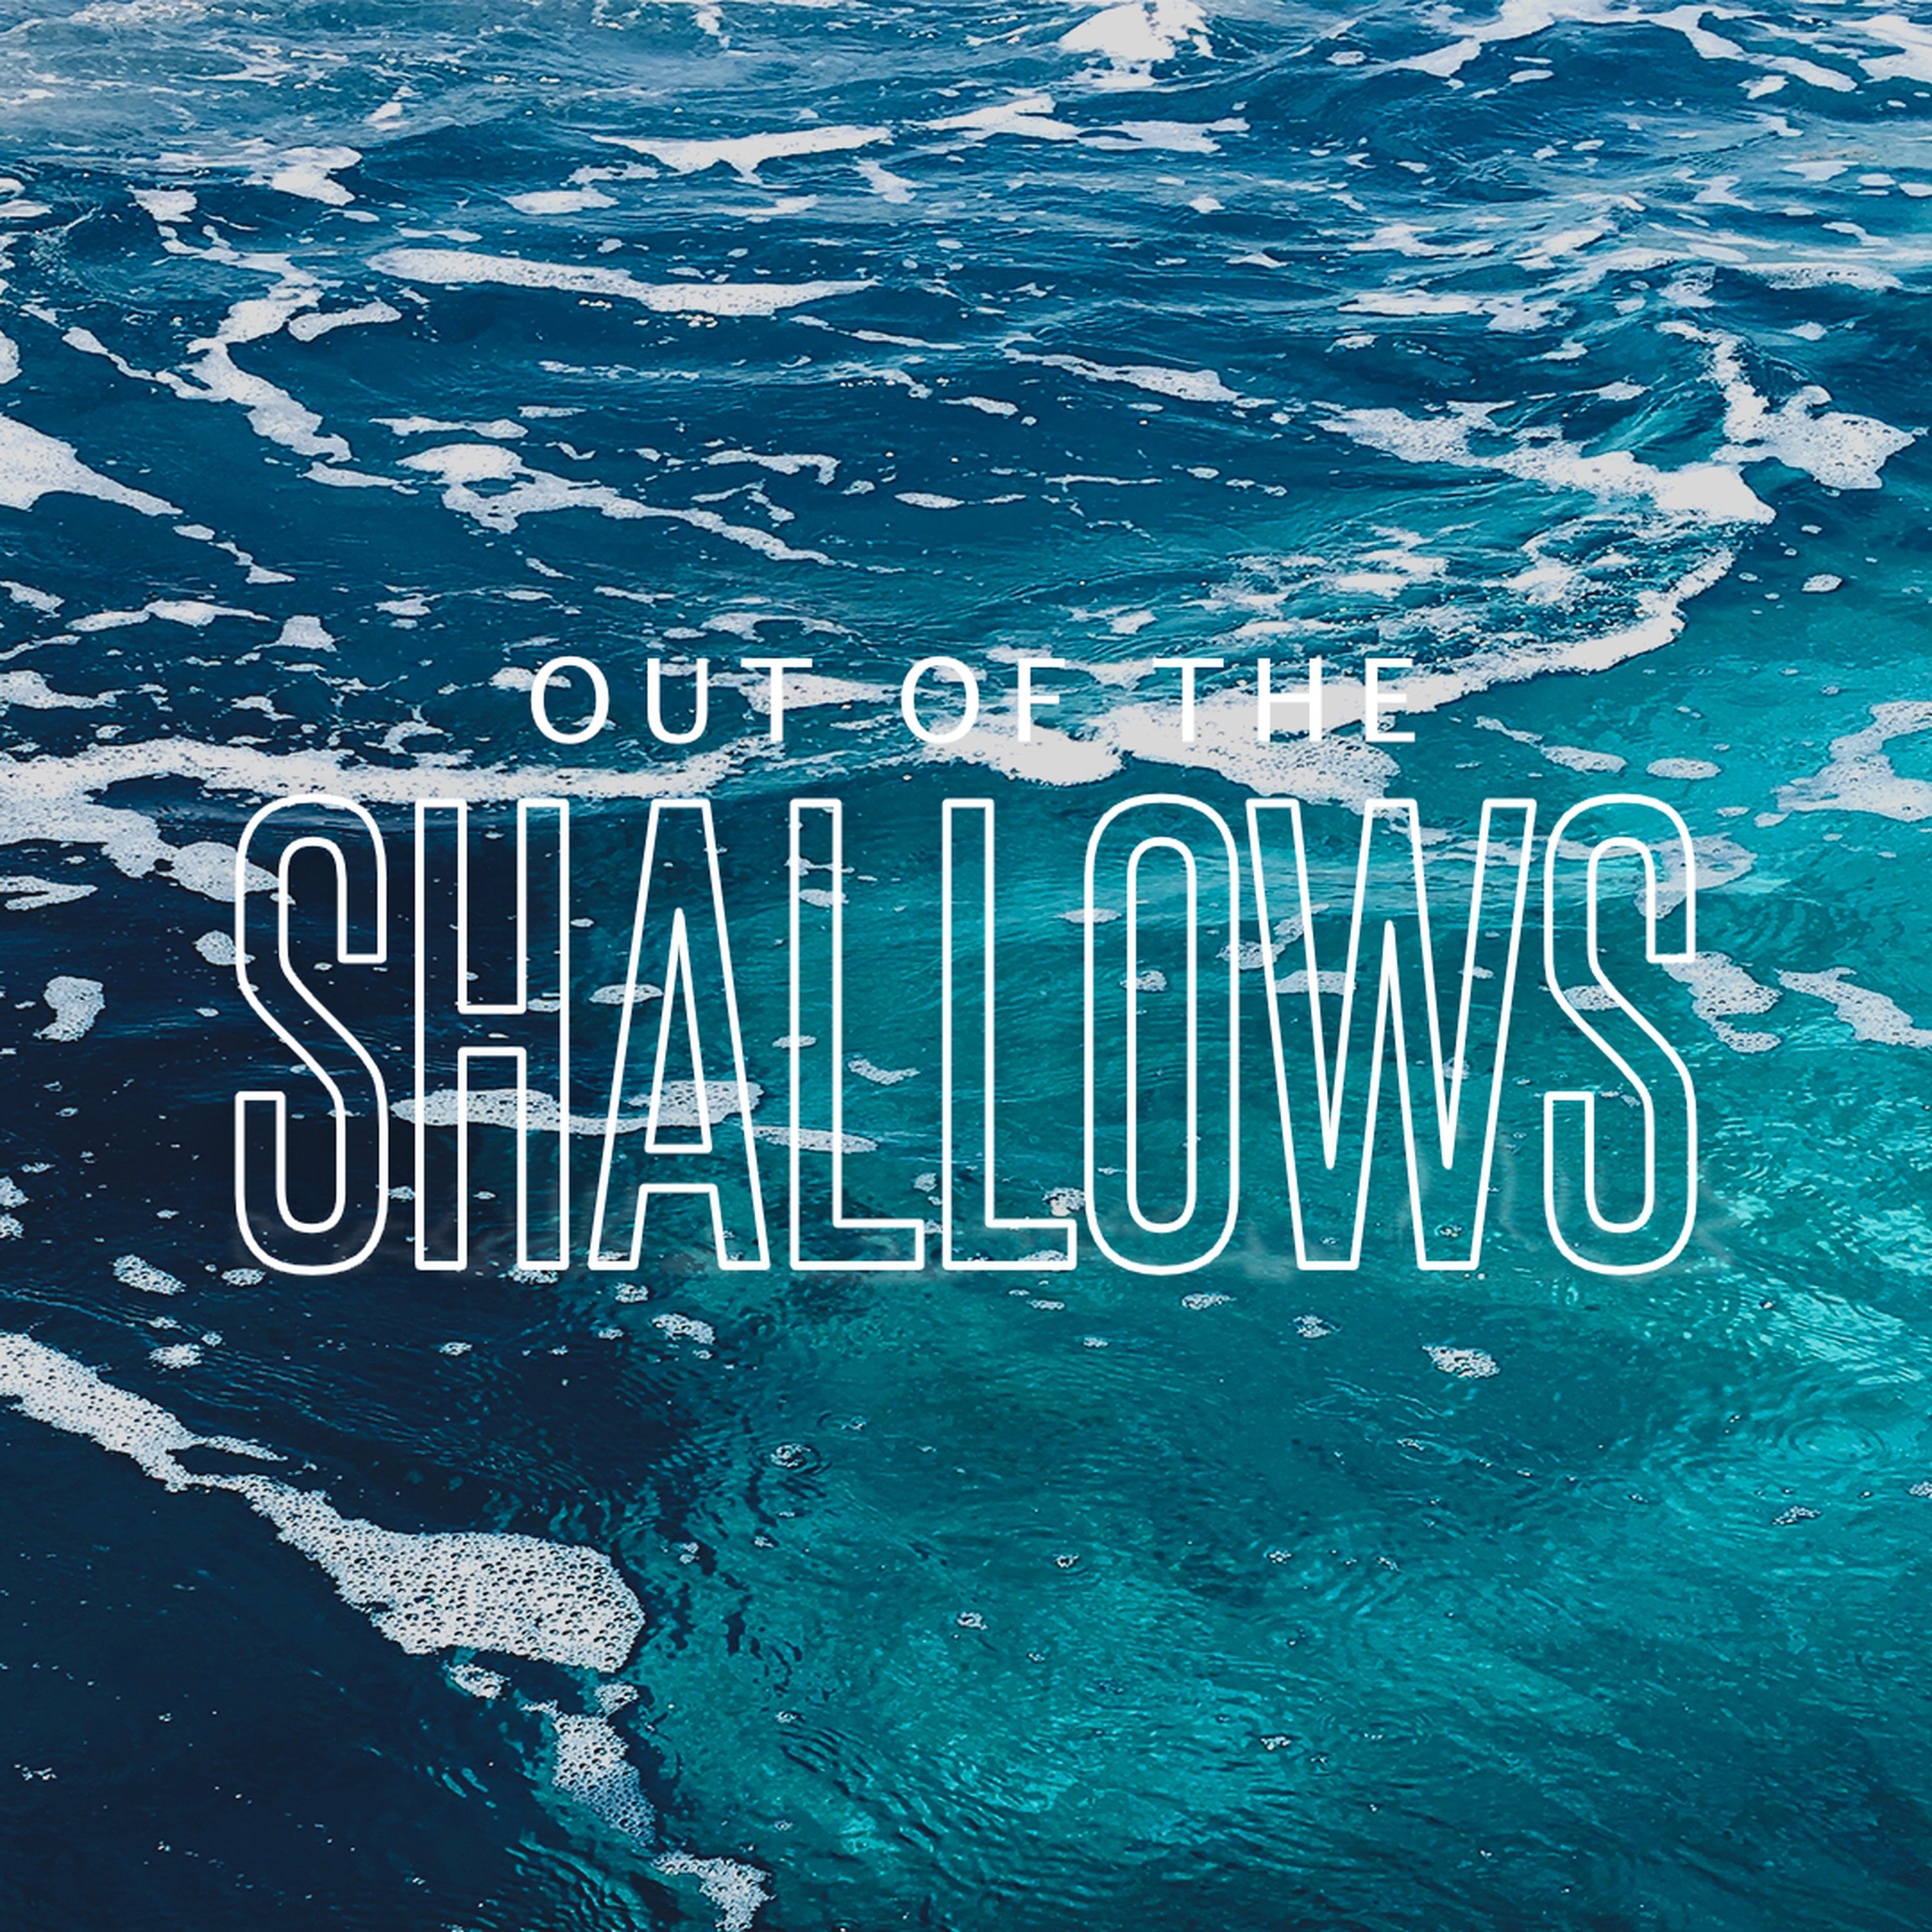 3.Out of the shallows